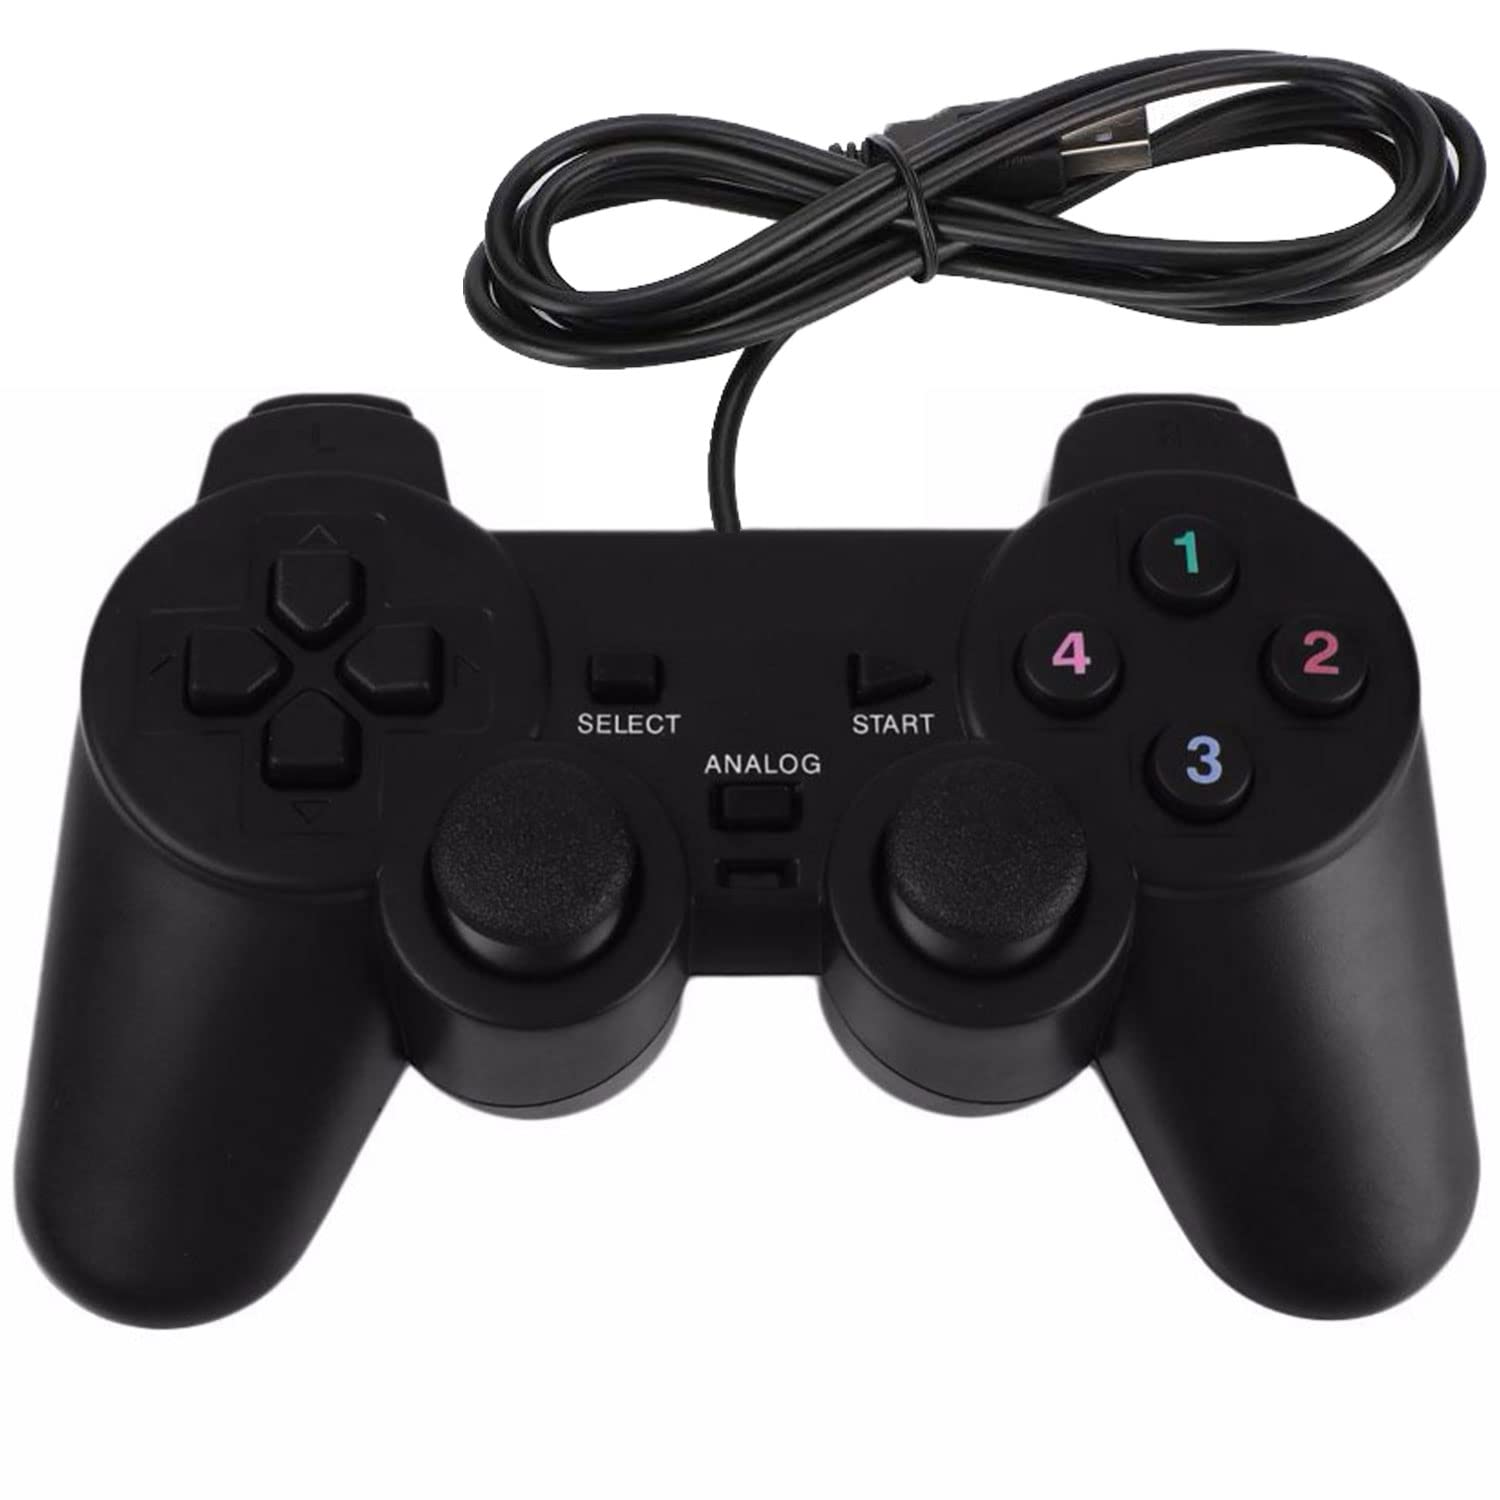 PlayStation controller connecting to console via USB cable